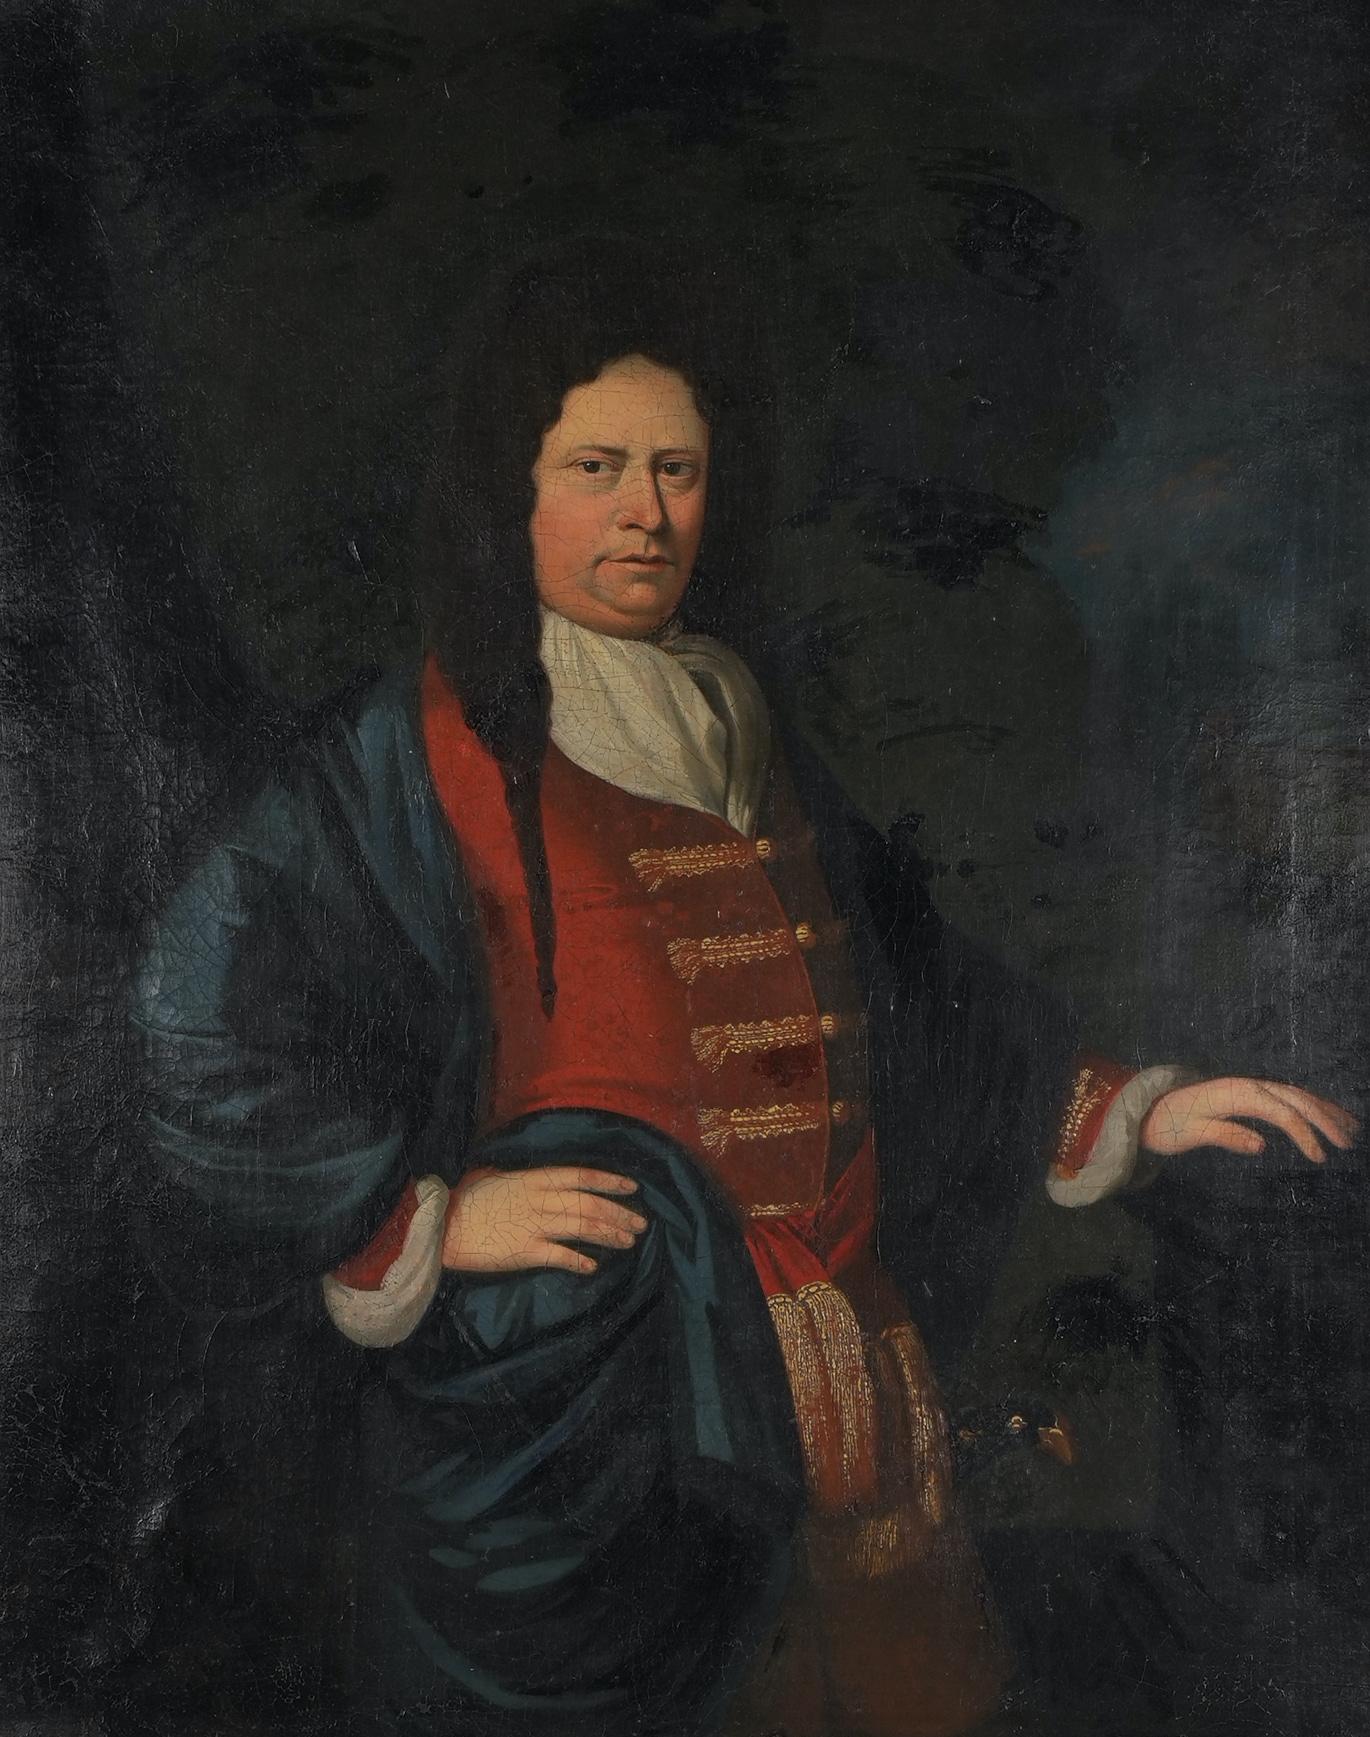 An oil-on-canvas full-scale portrait of a standing man in costume typical of the Baroque era of c. 1720, France. Purchased from a dealer in Geneva, Switzerland. The canvas is in good condition, but would benefit from a cleaning.